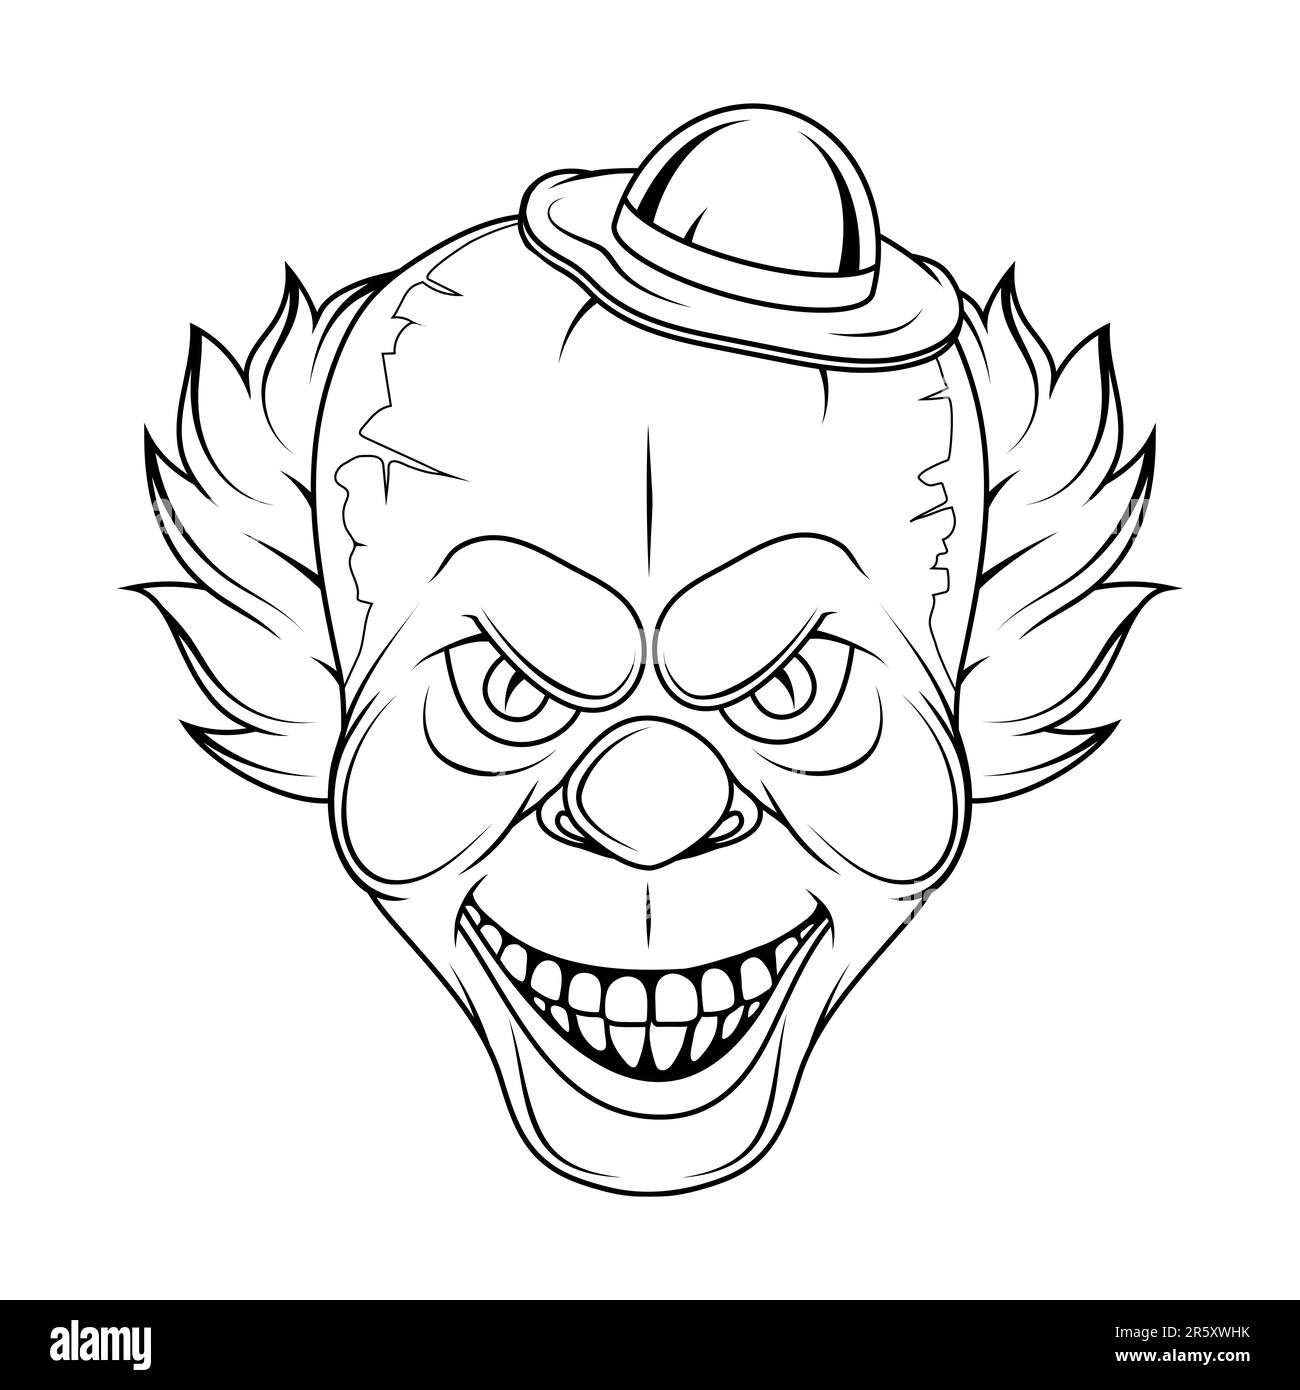 Scary clown black and white stock photos images